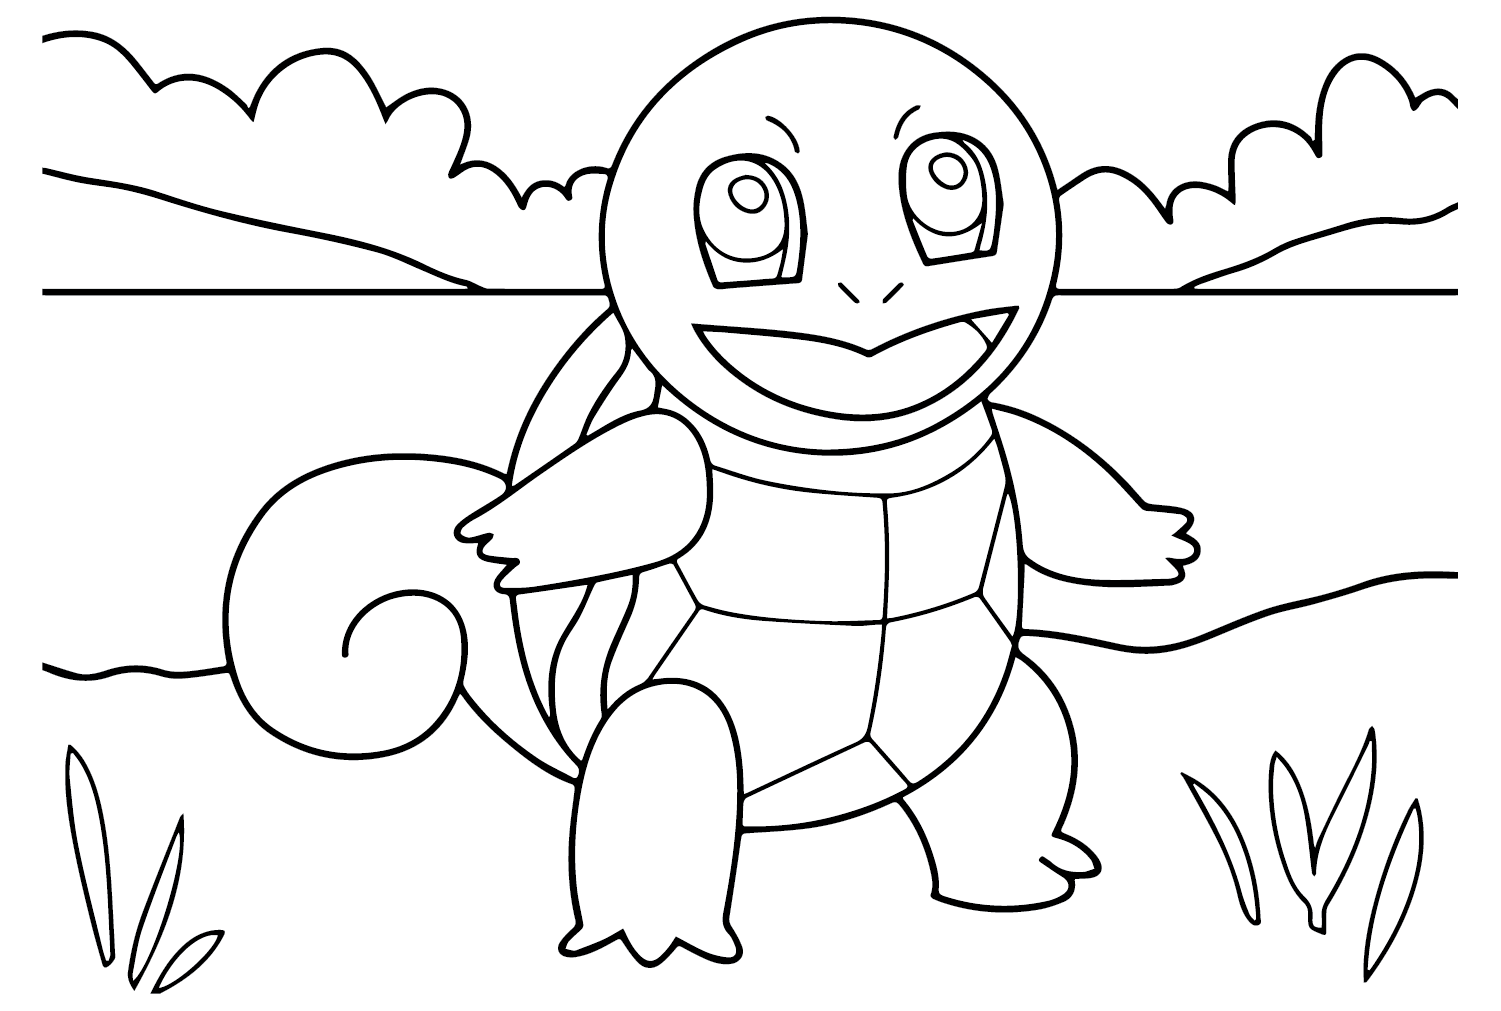 Squirtle Coloring Page PDF from Squirtle